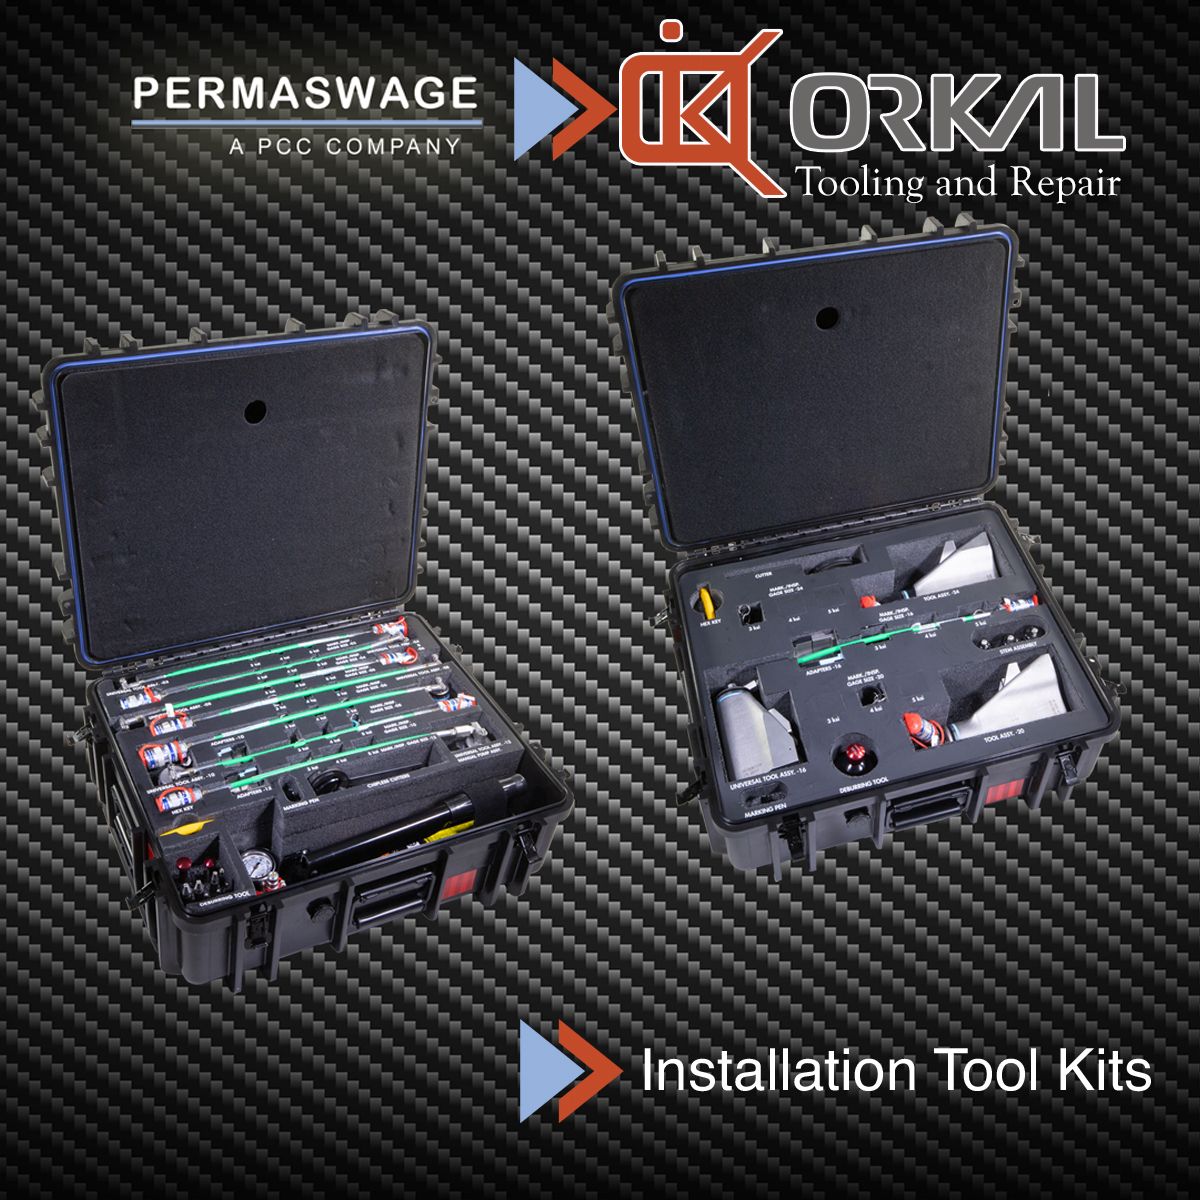 auto draft: two permaswage installation tool kits by orkal, displayed open to reveal various tools inside, set against a textured dark background.